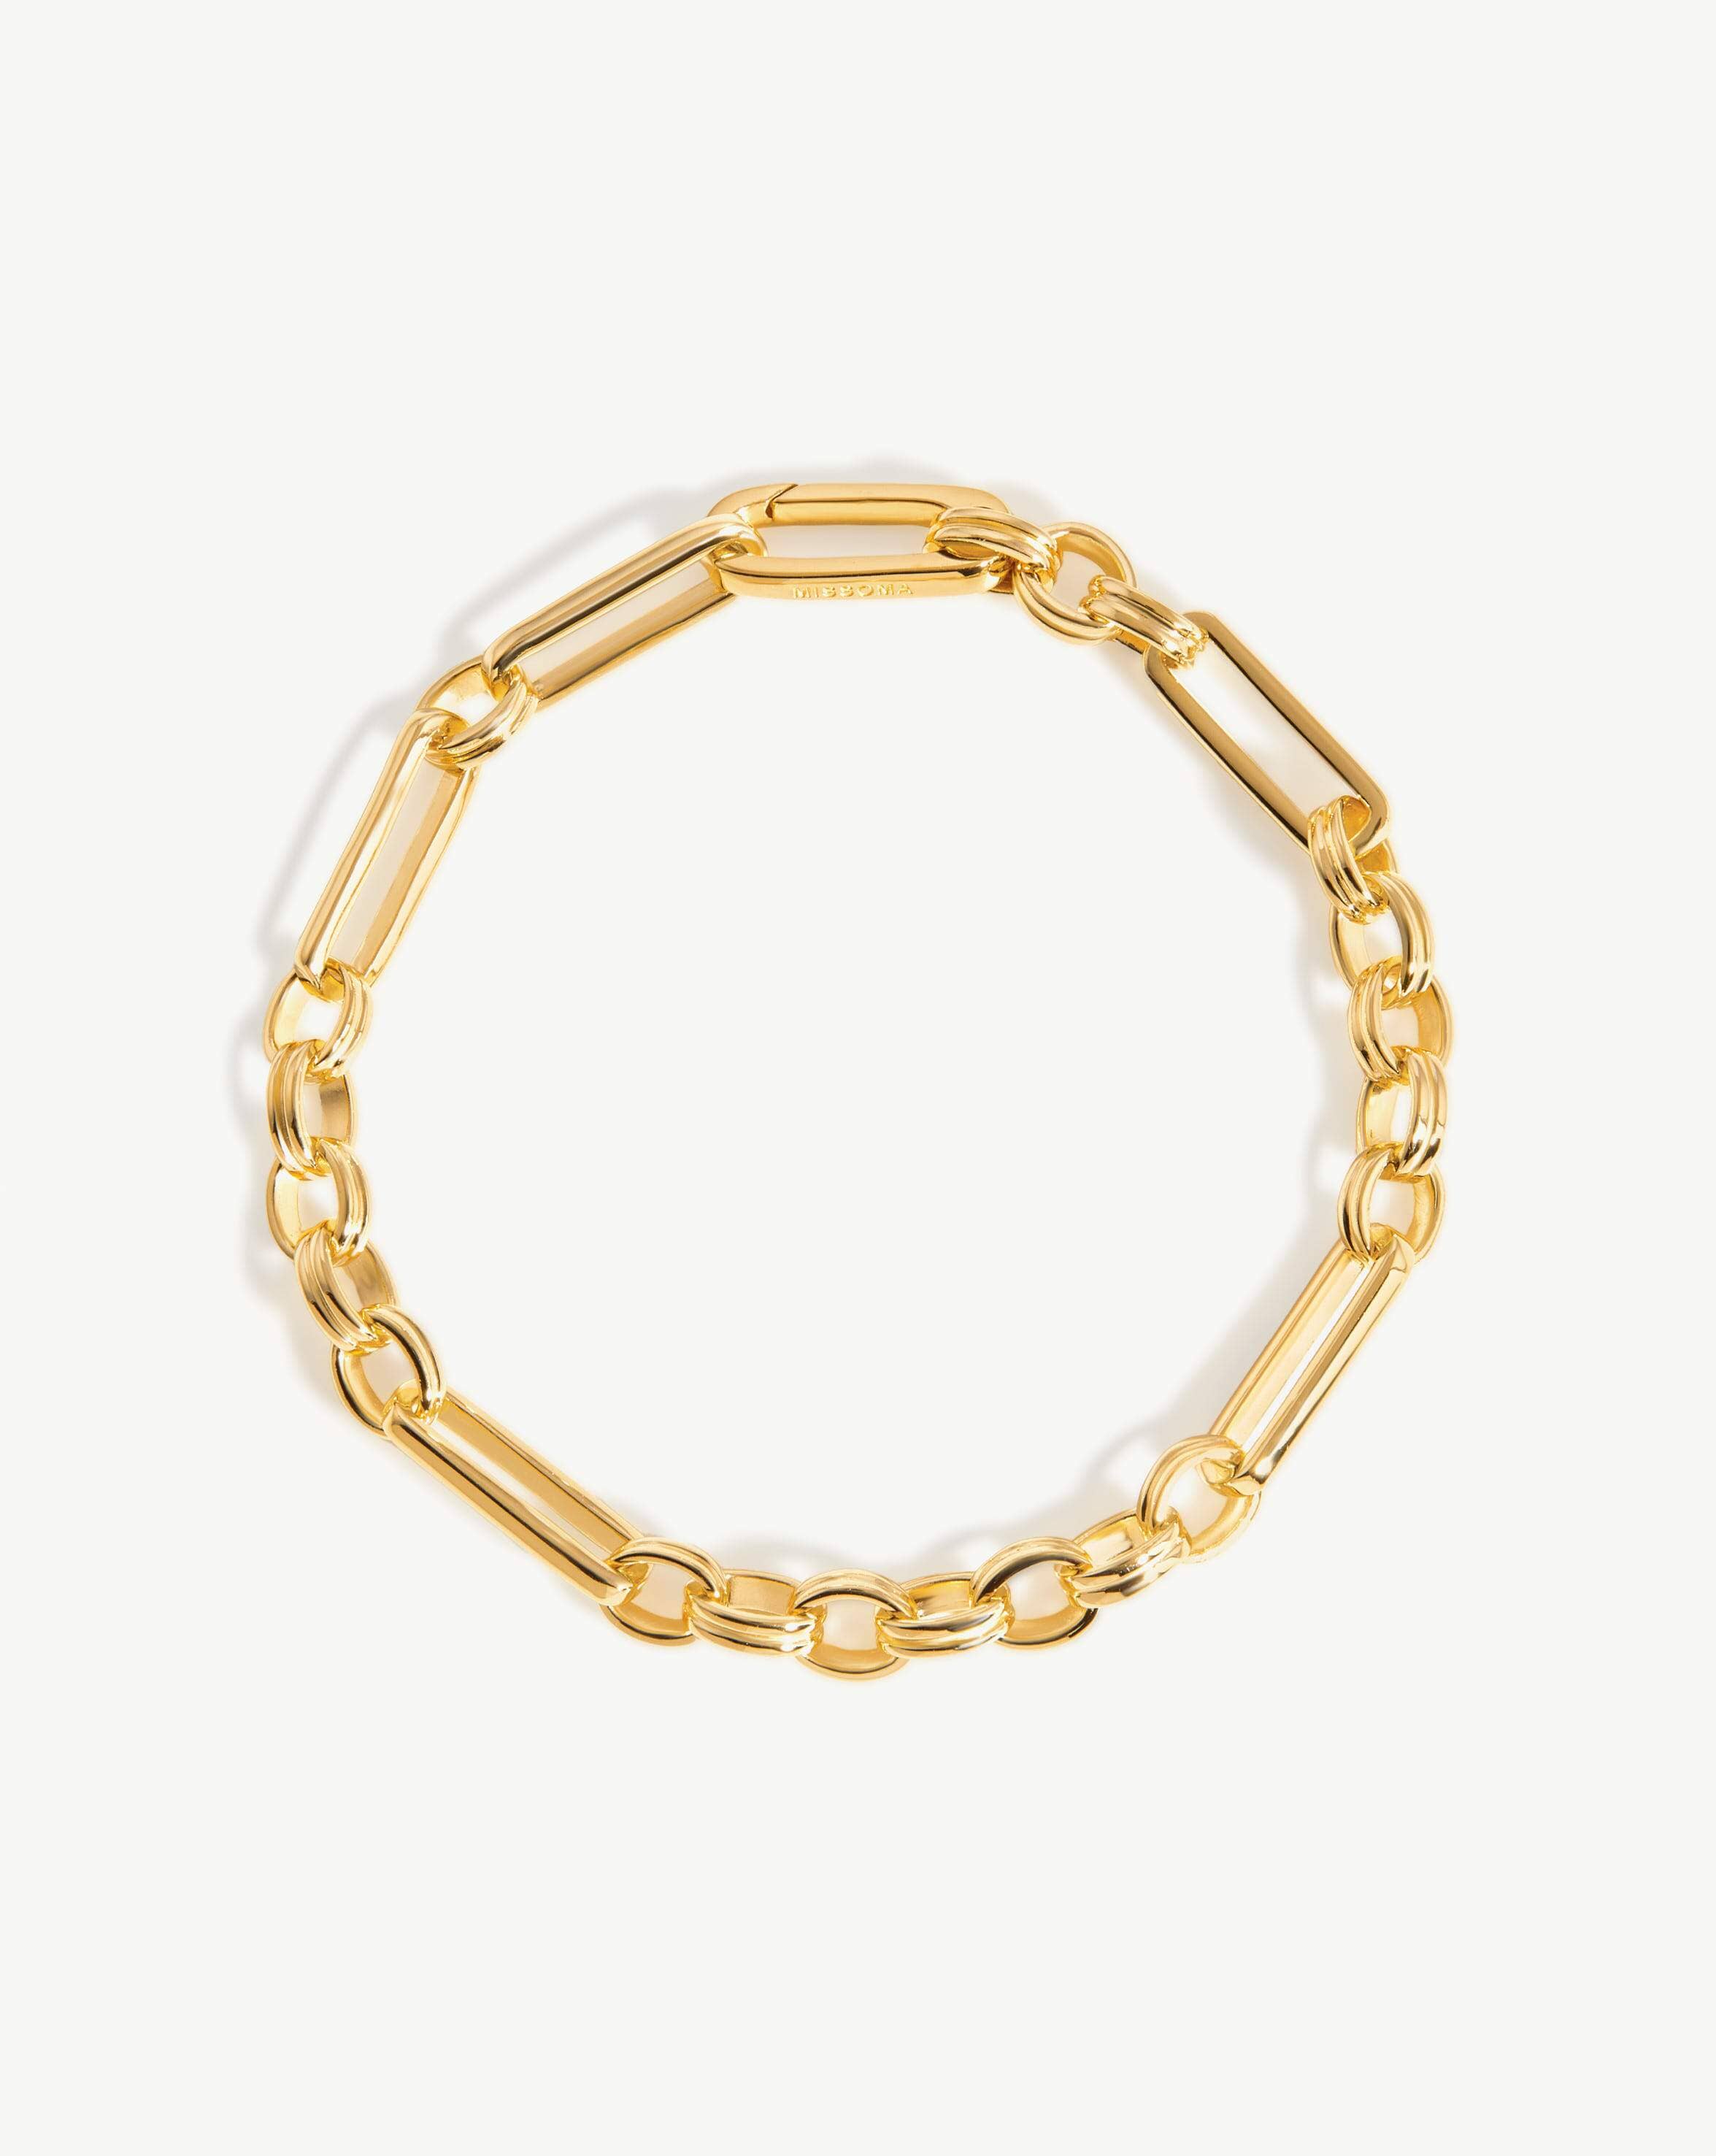 Axiom Chain Bracelet | 18ct Gold Plated Bracelets Missoma 18ct Gold Plated 